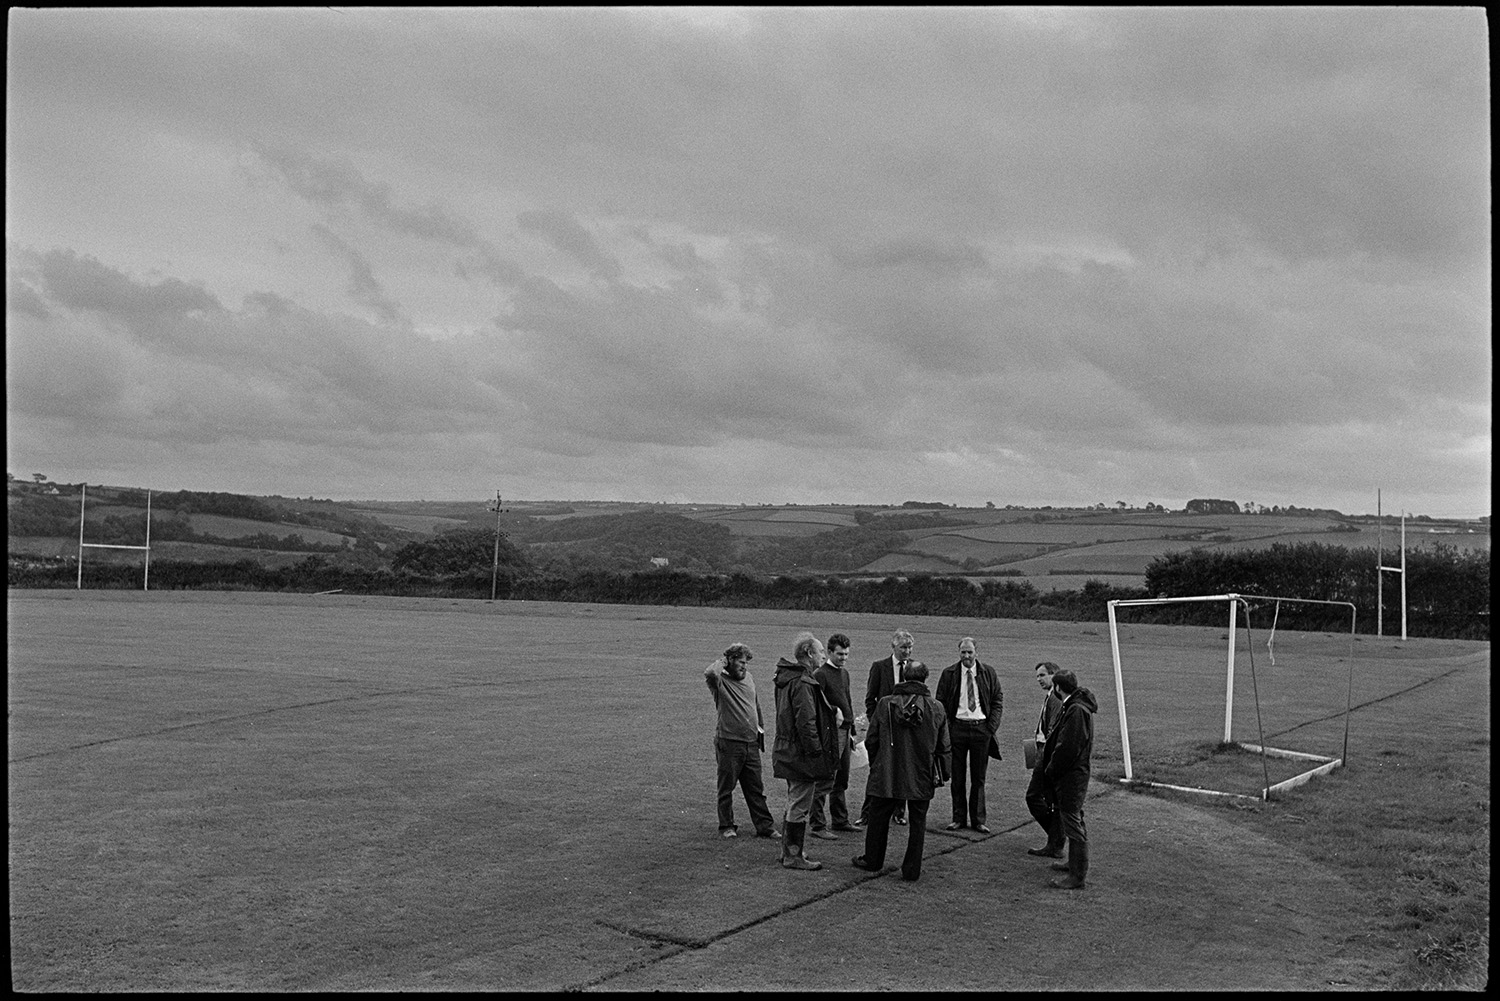 Planners, architects, teacher meet on site to discuss plans for new school.
[Planners, architects and teachers meeting in a field in Chulmleigh to discuss the site of the new school. They are standing in a sports field with rugby and football goal posts. Woodland and fields are visible in the background.]